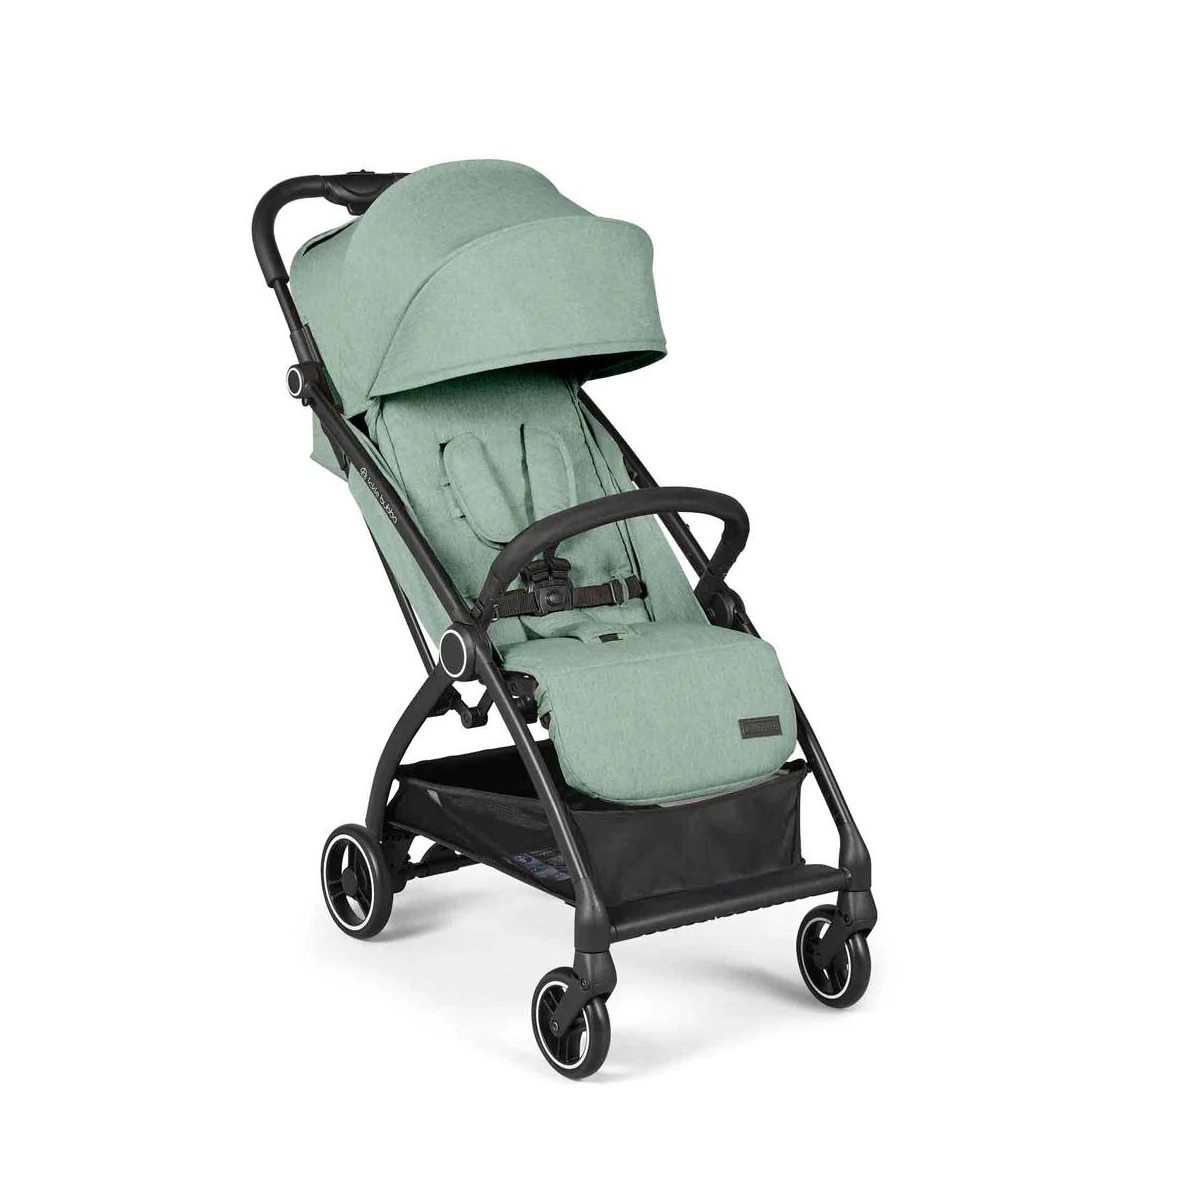 Ickle Bubba Aries Autofold Stroller